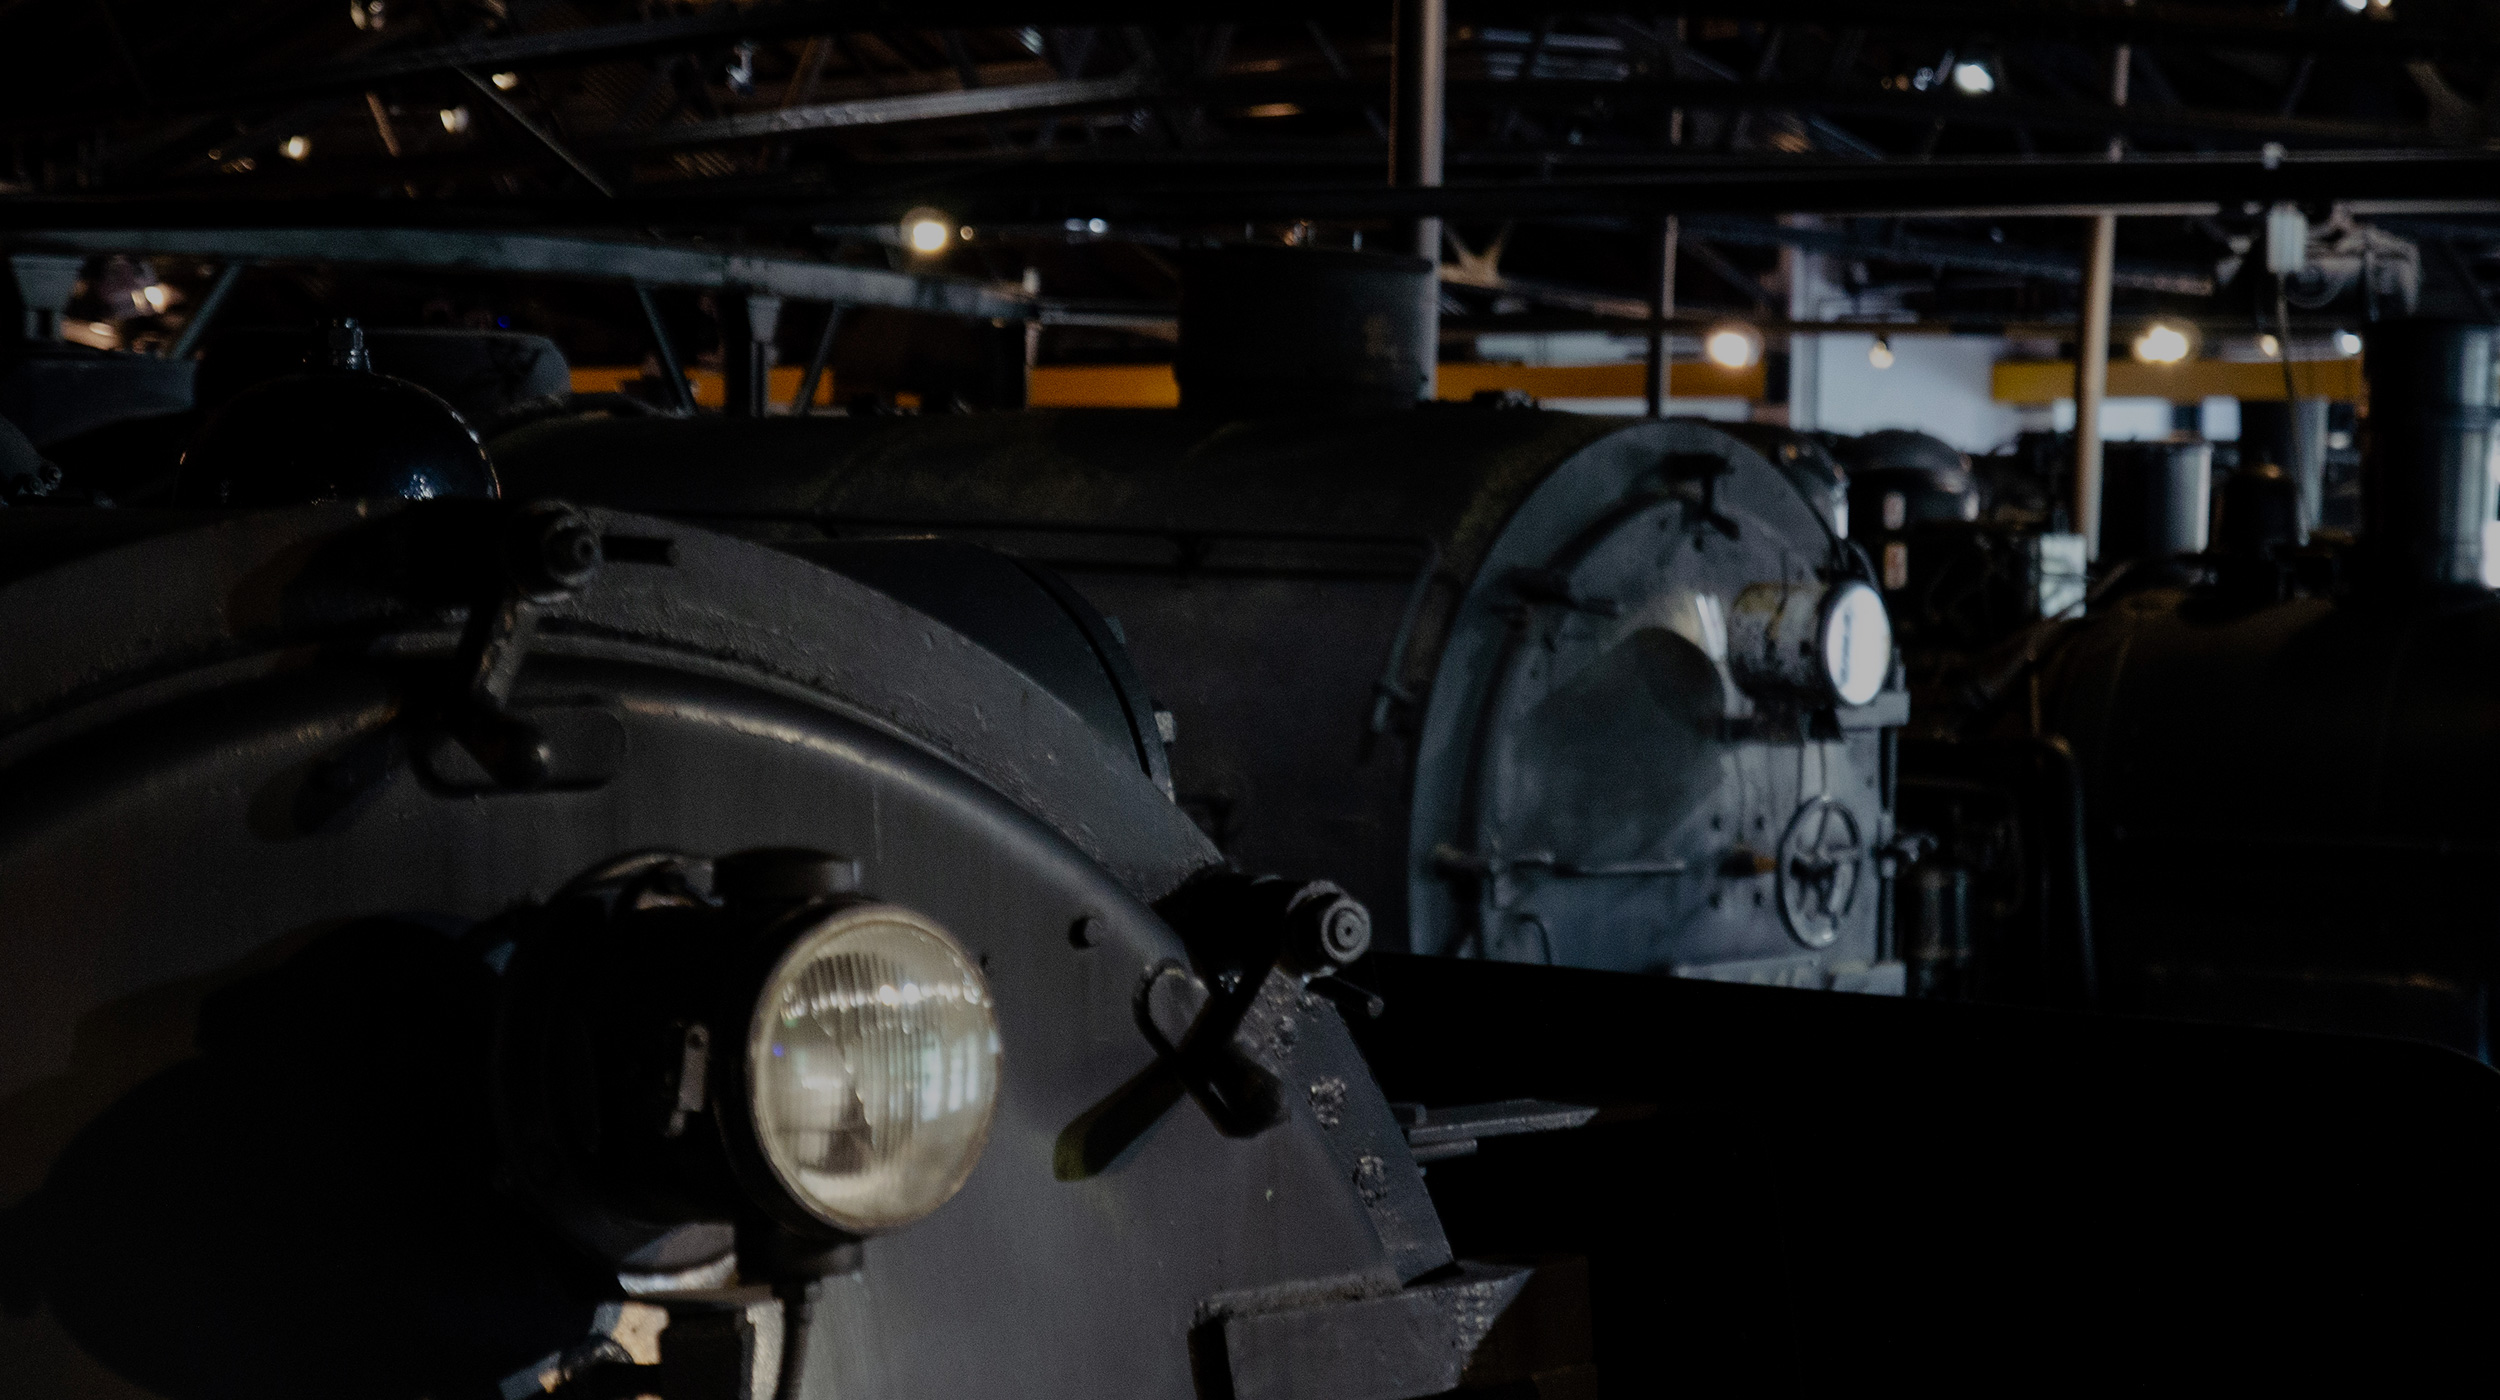 Fronts of the boilers of multiple steam locomotives in a row